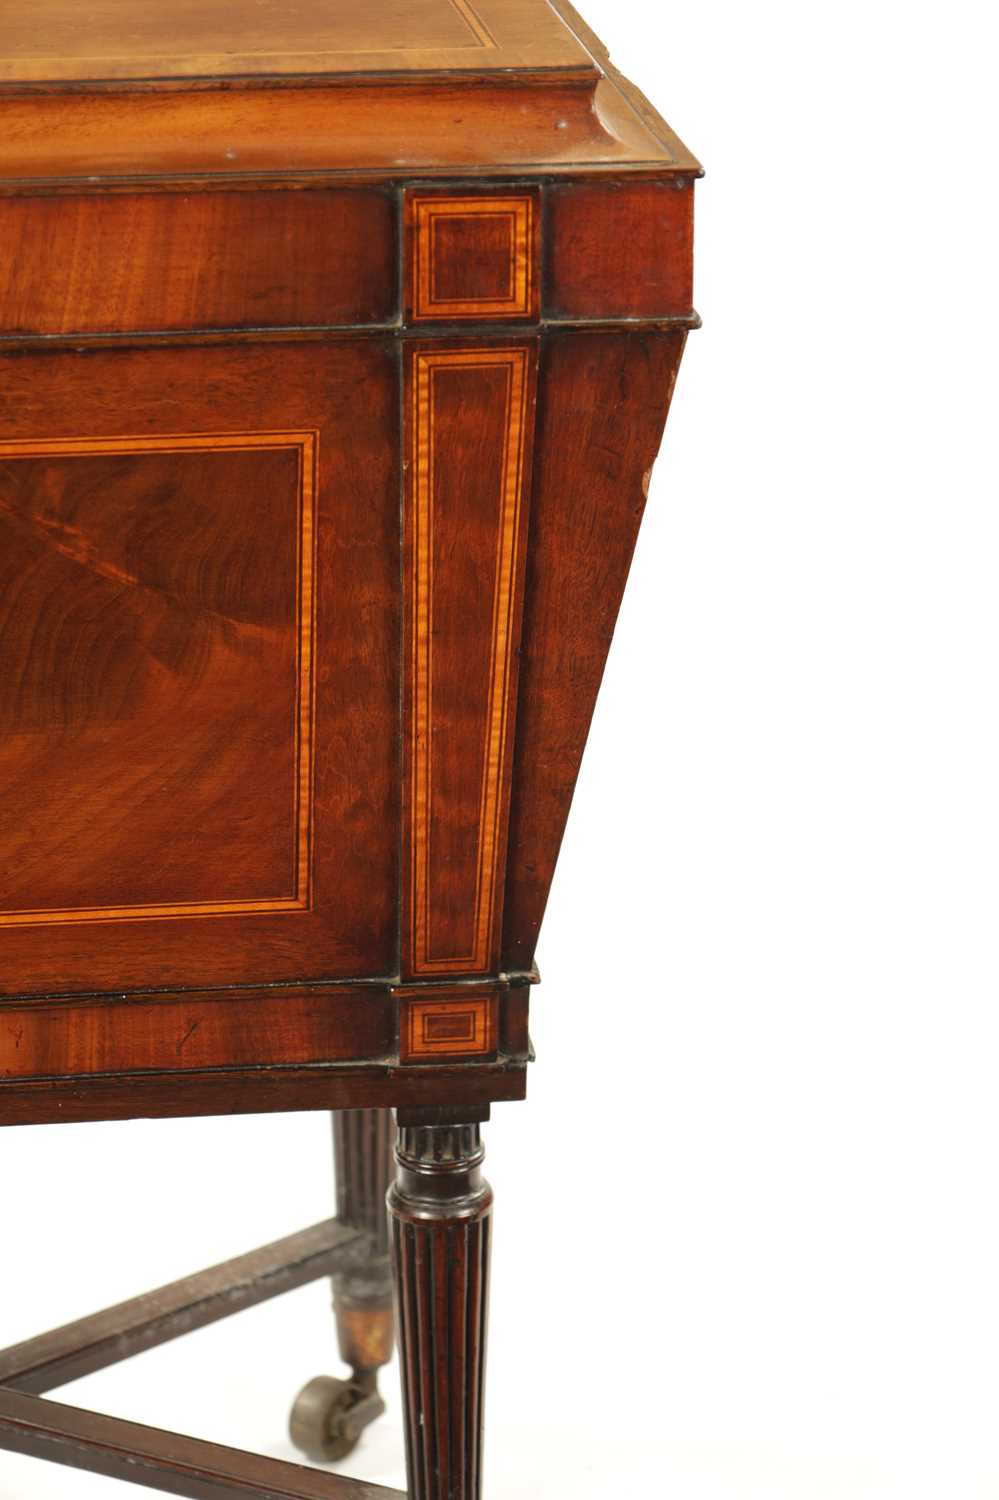 A REGENCY INLAID MAHOGANY CELLARETTE ON TAPERED FLUTED LEGS IN THE MANNER OF GILLOWS - Image 5 of 12